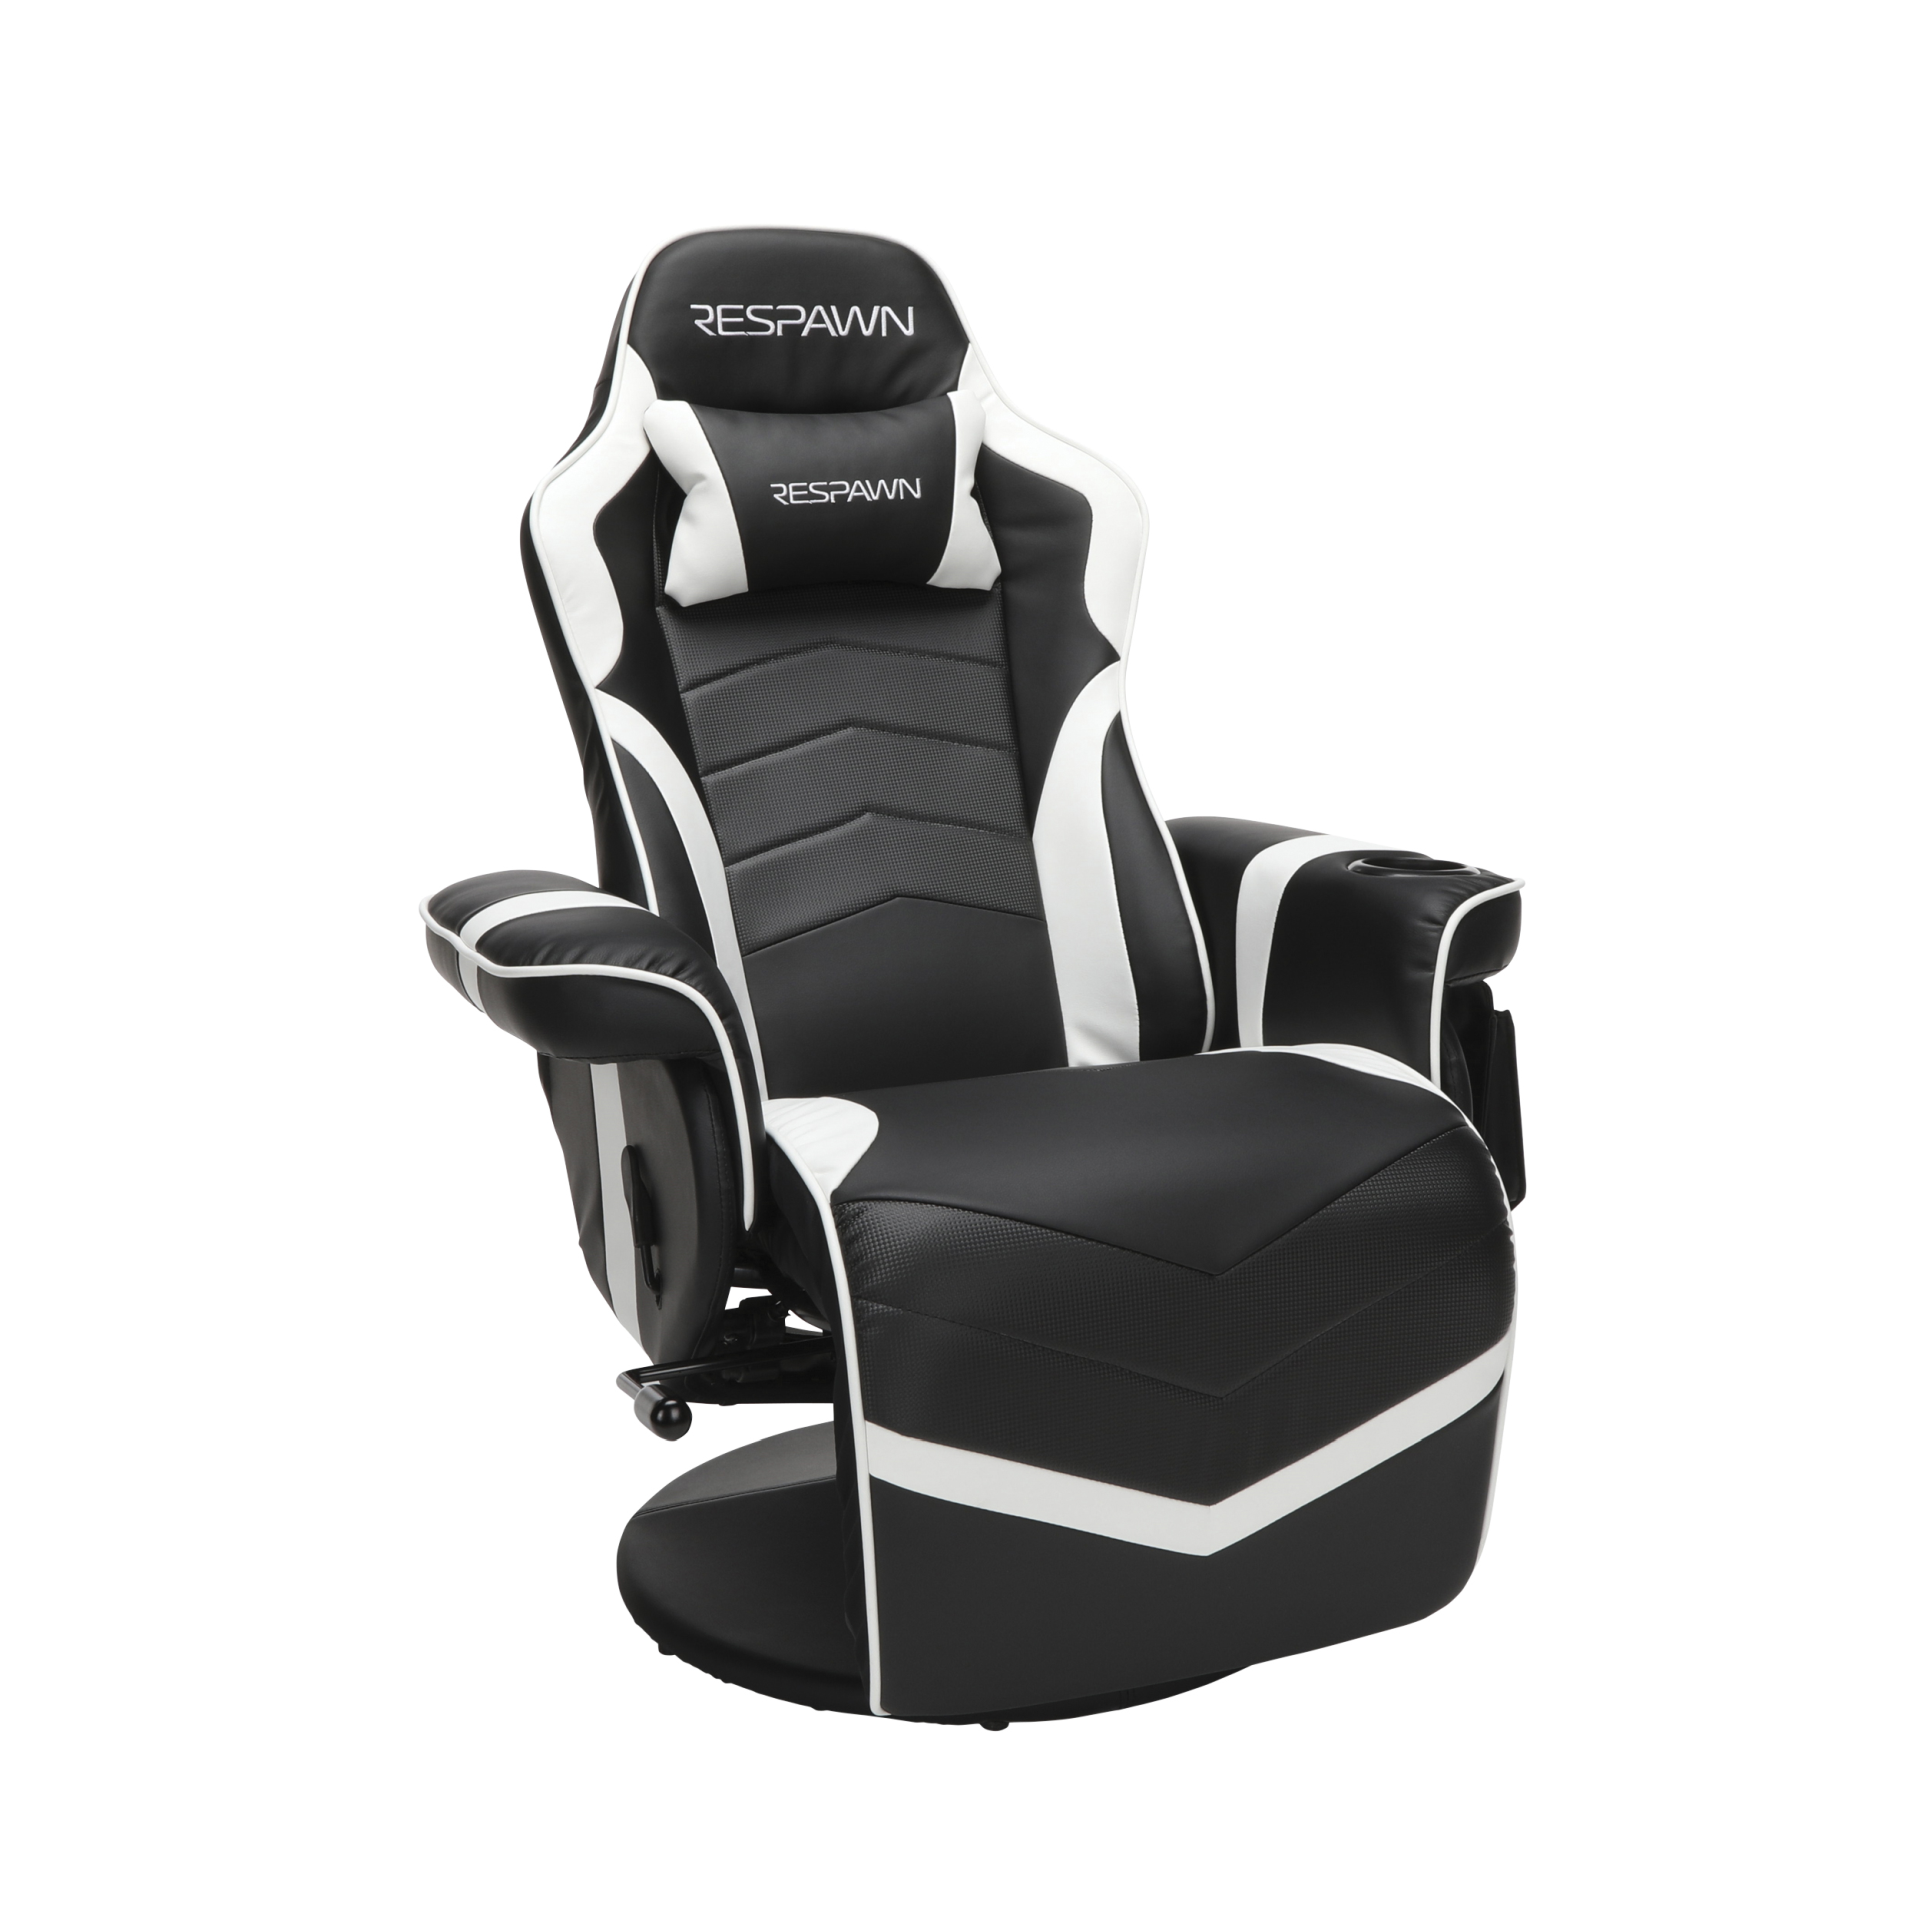 RESPAWN RSP-900 Gaming Recliner #33